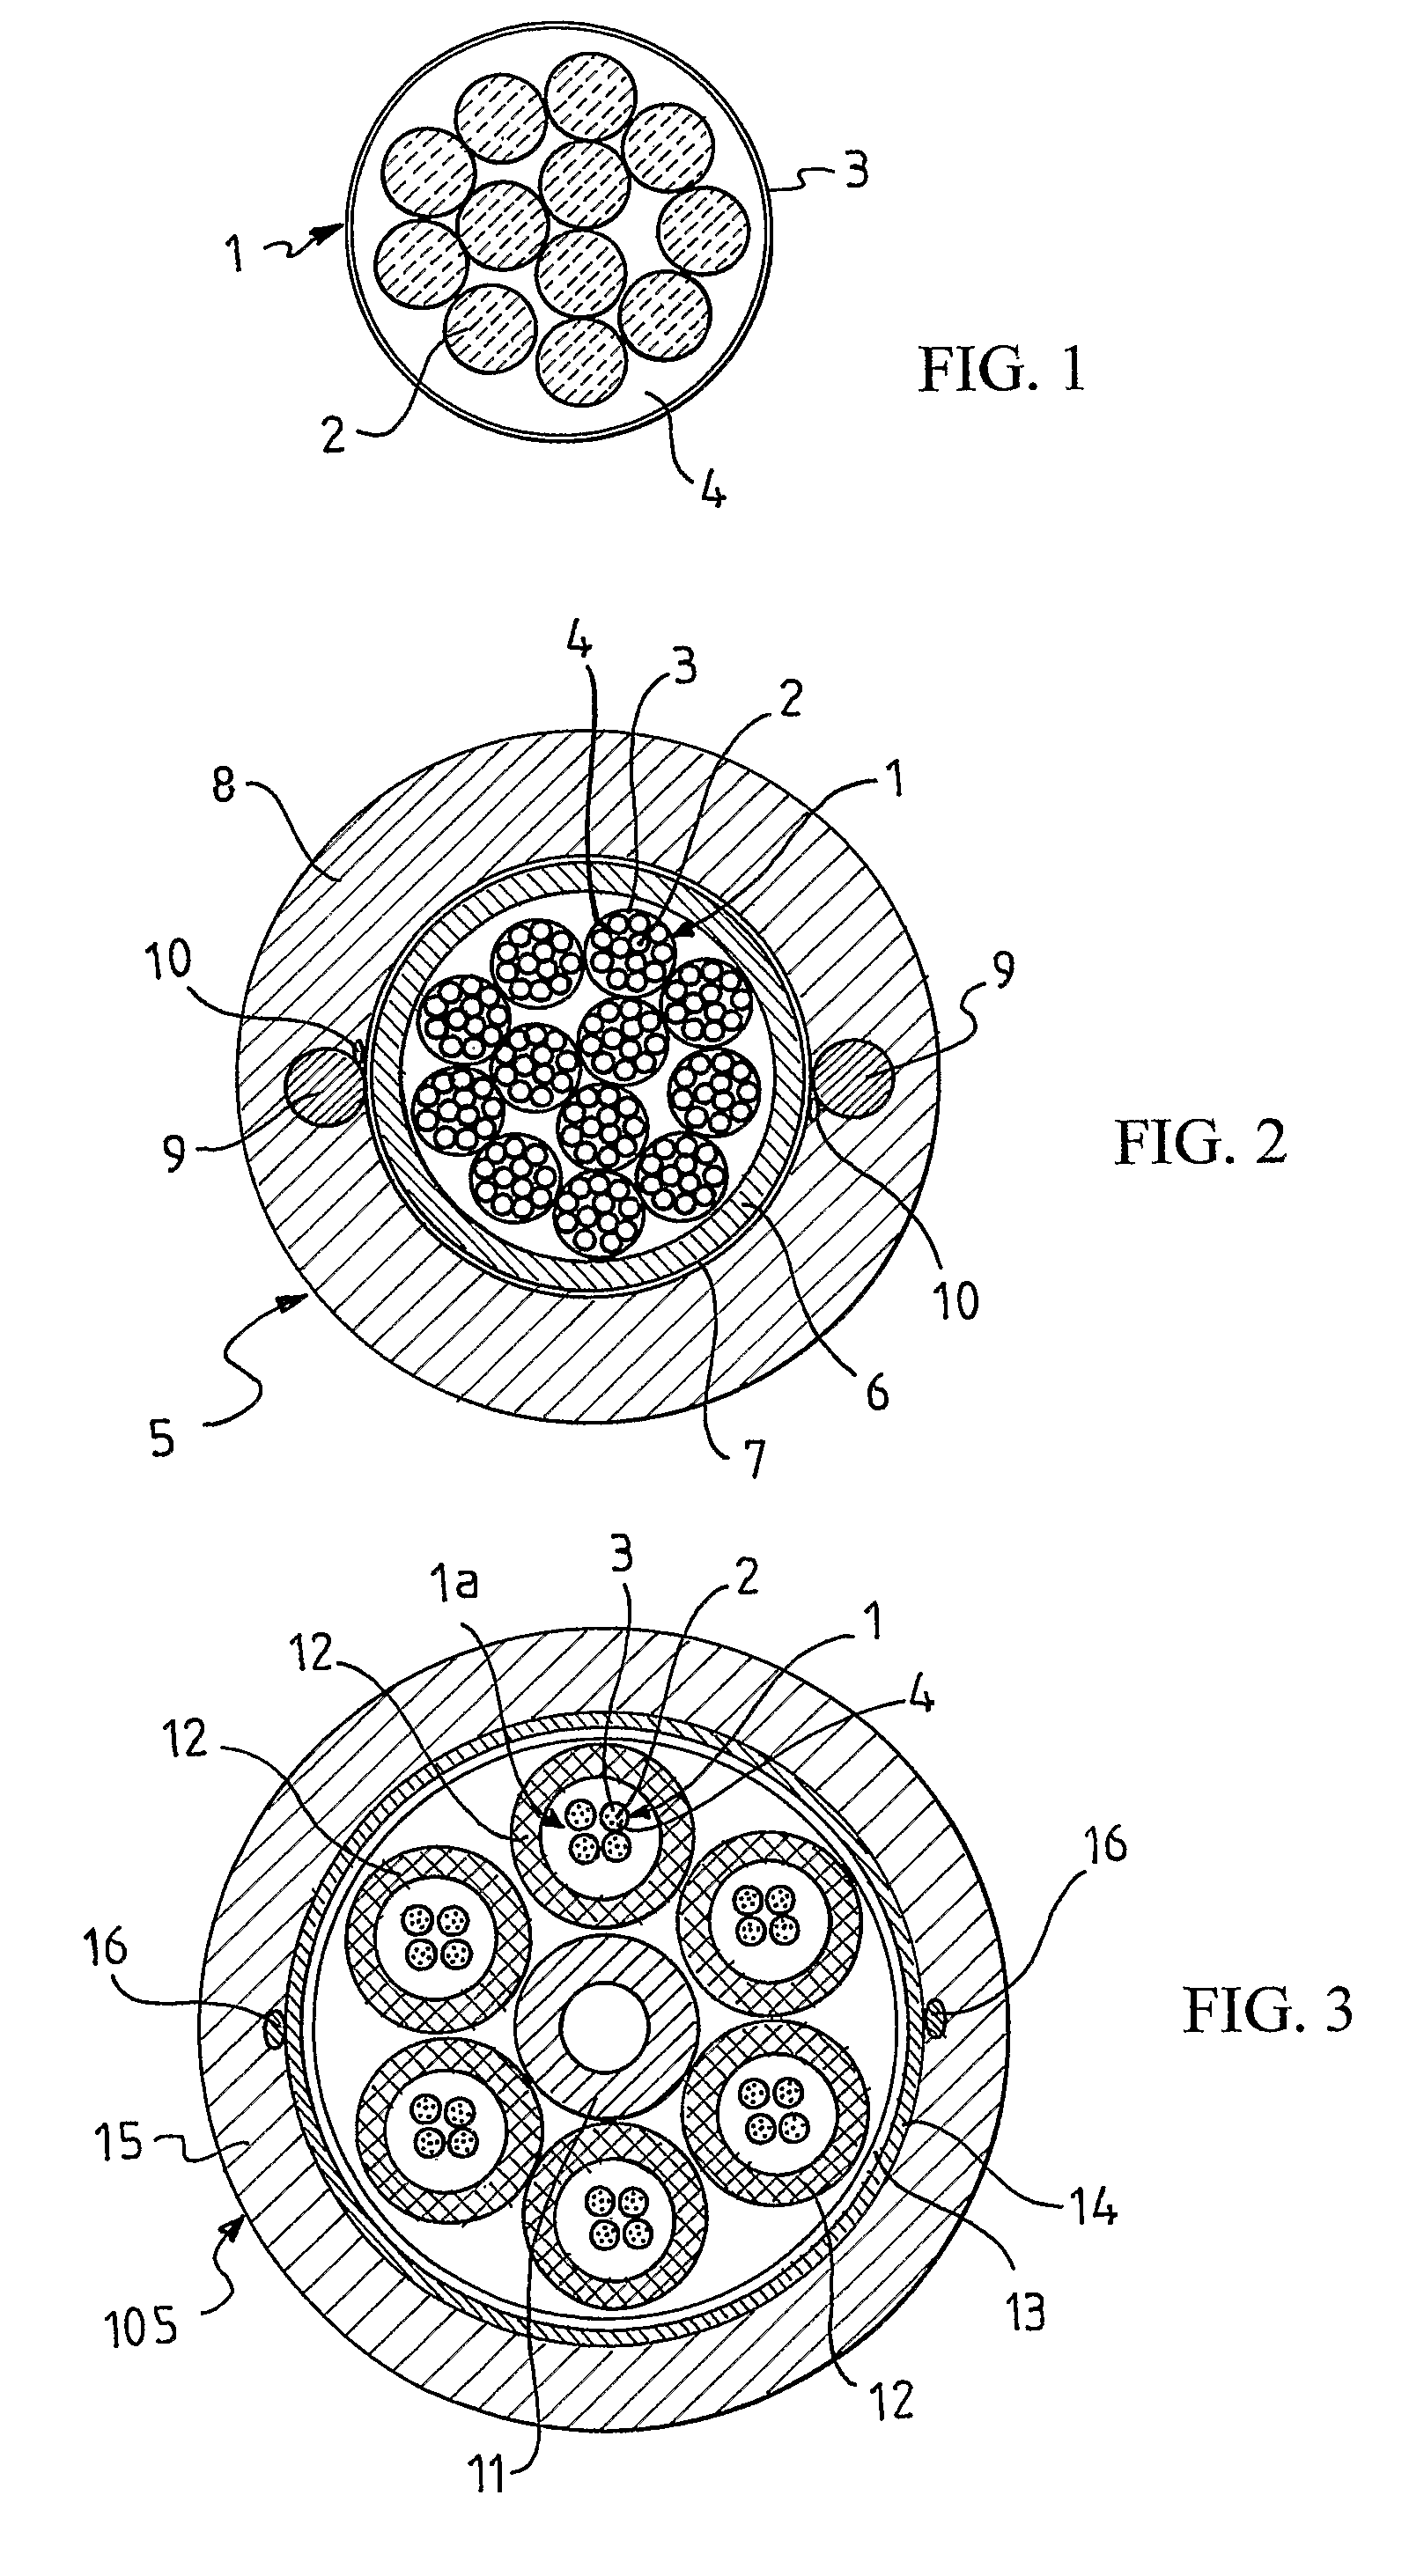 Water-resistant optical cable and manufacturing method